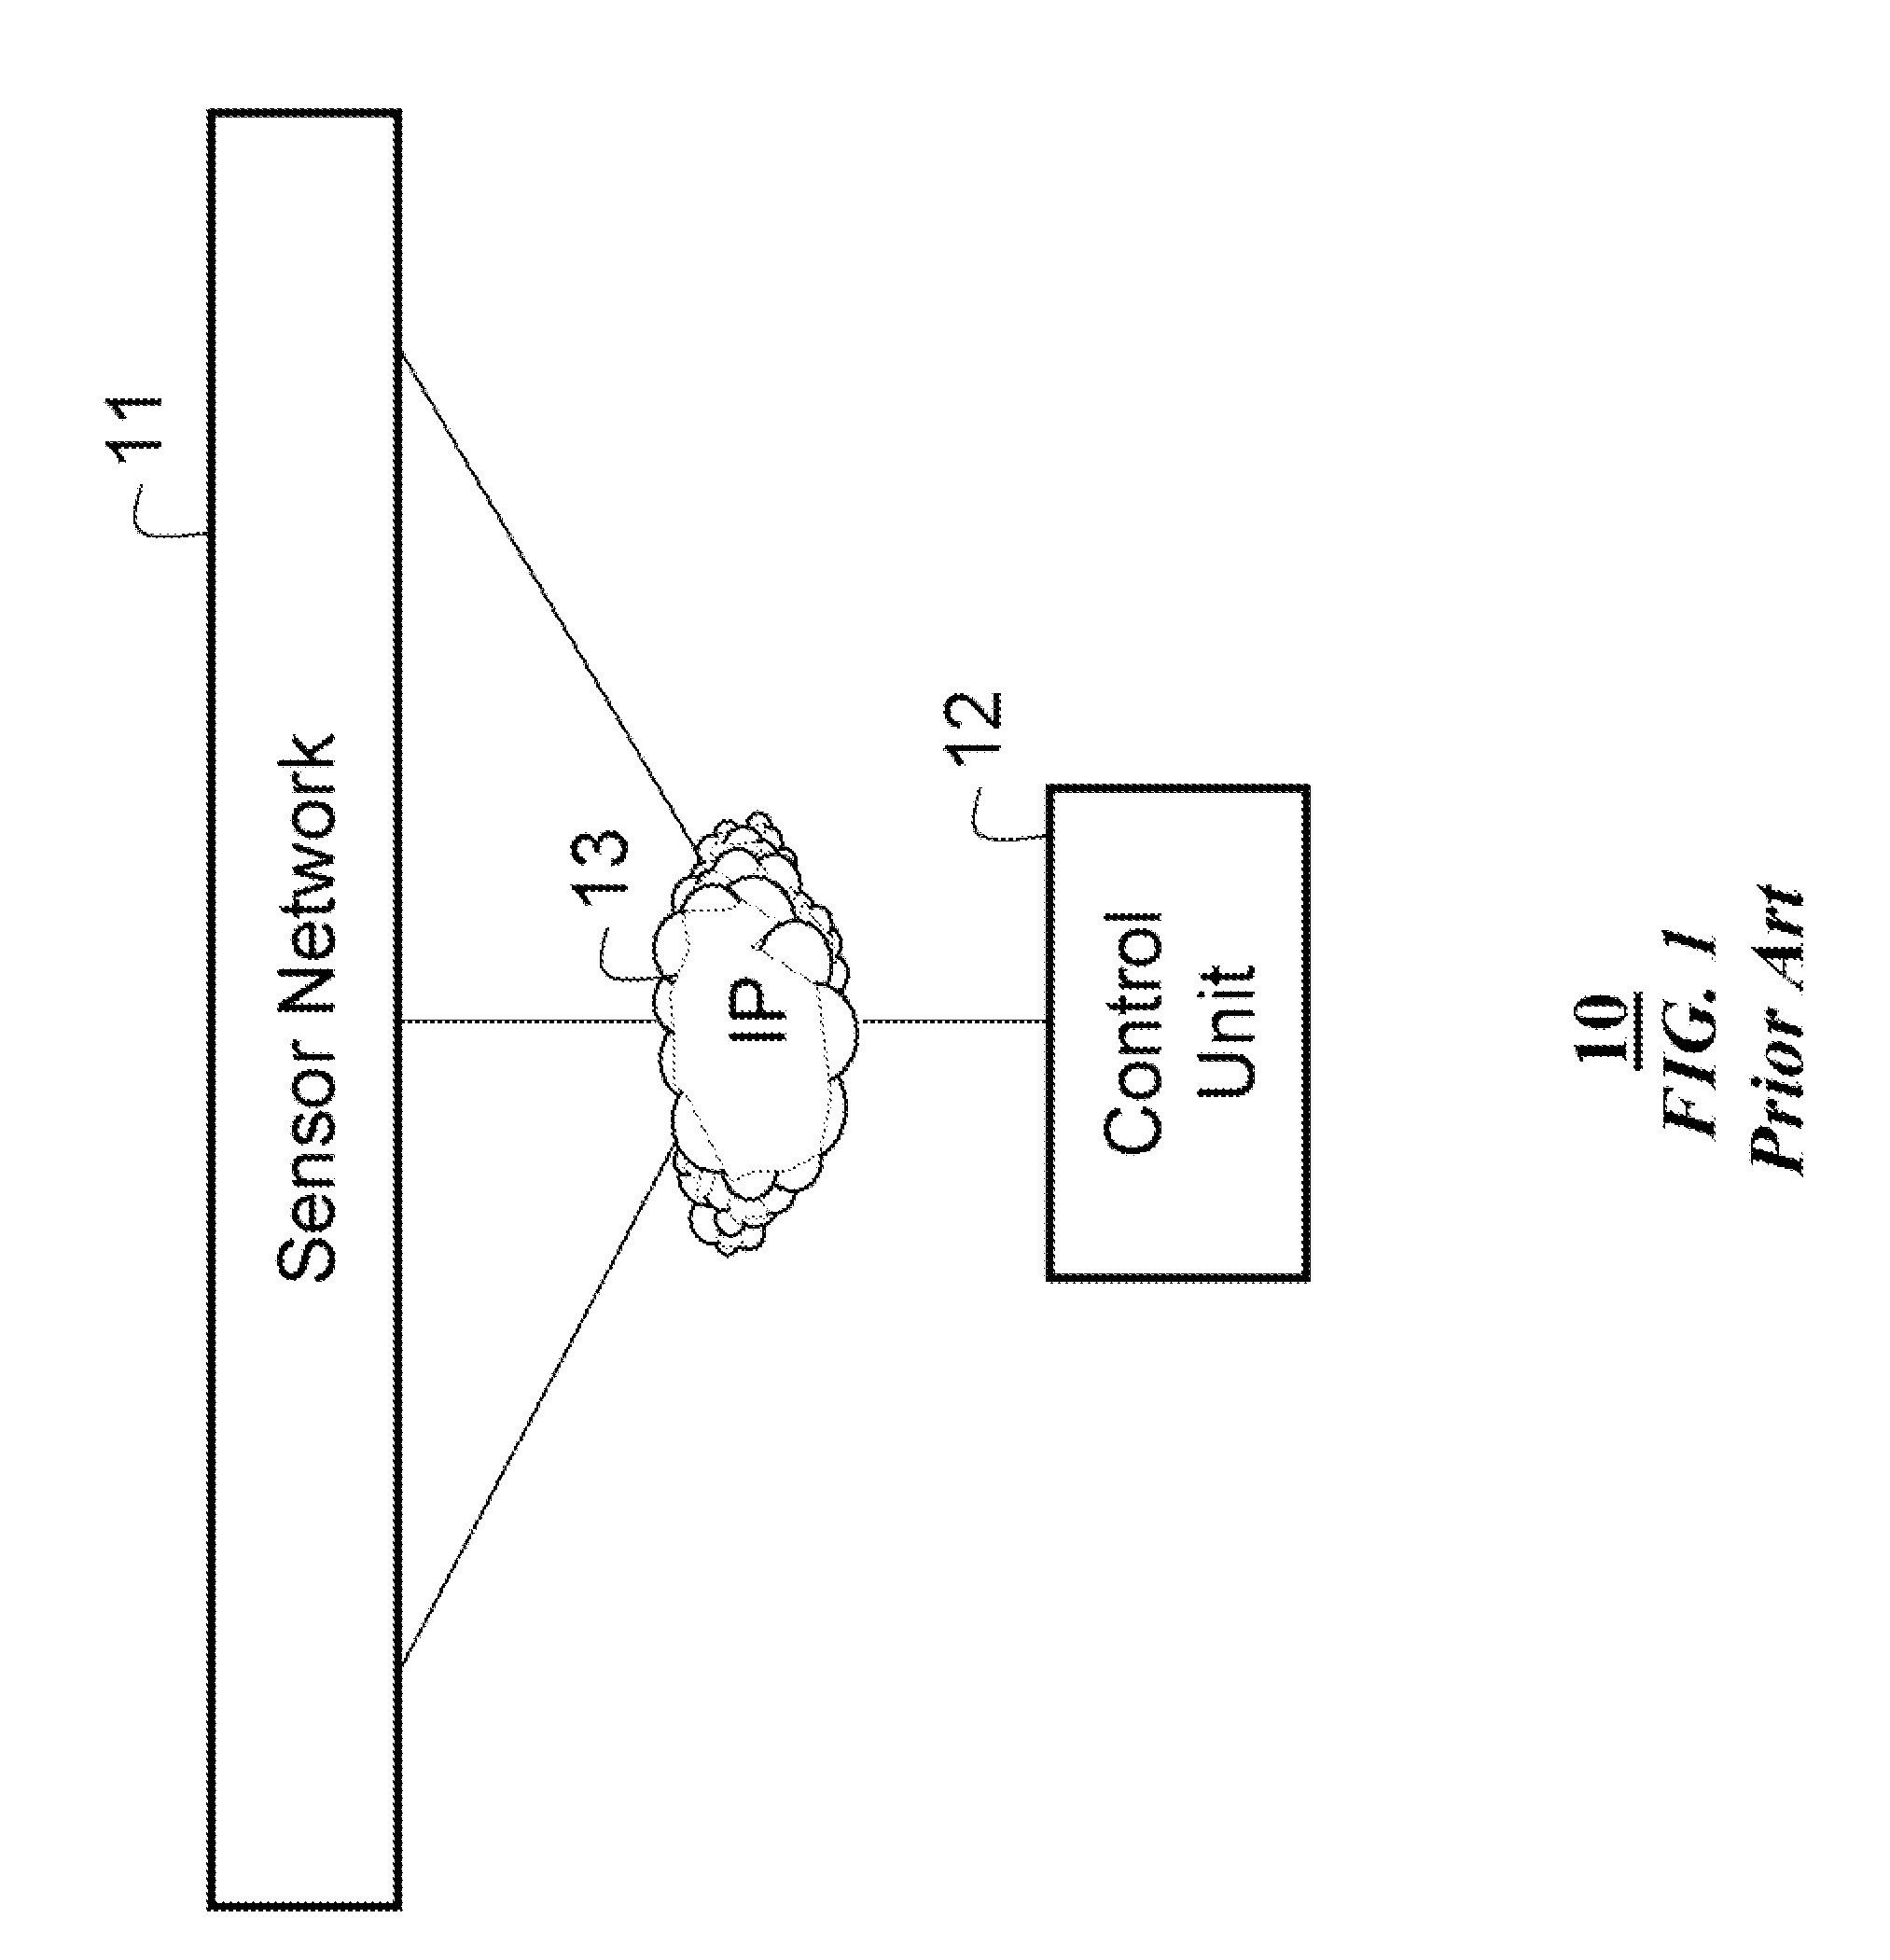 System and method for measuring performances of surveillance systems